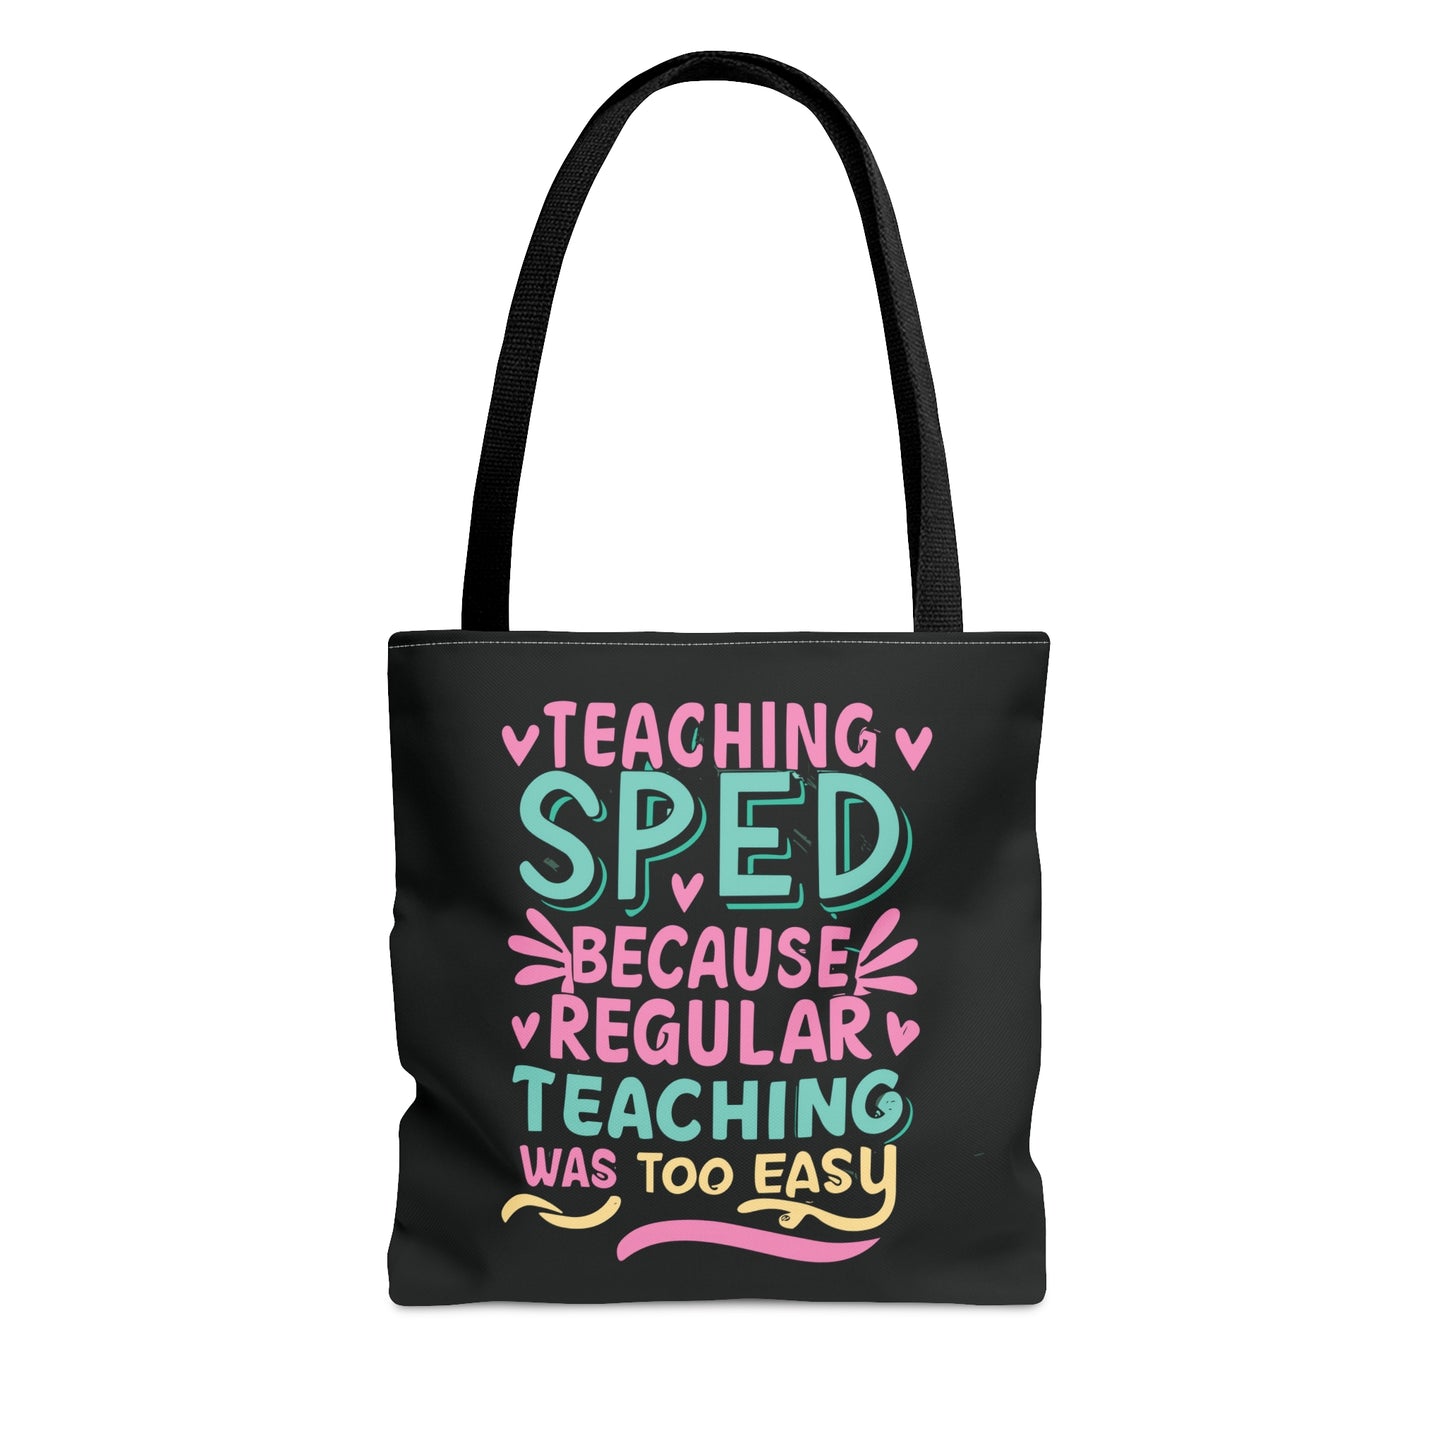 Special Ed Teacher Tote Bag - "Teaching SPED Because Regular Teaching Was Too Easy"